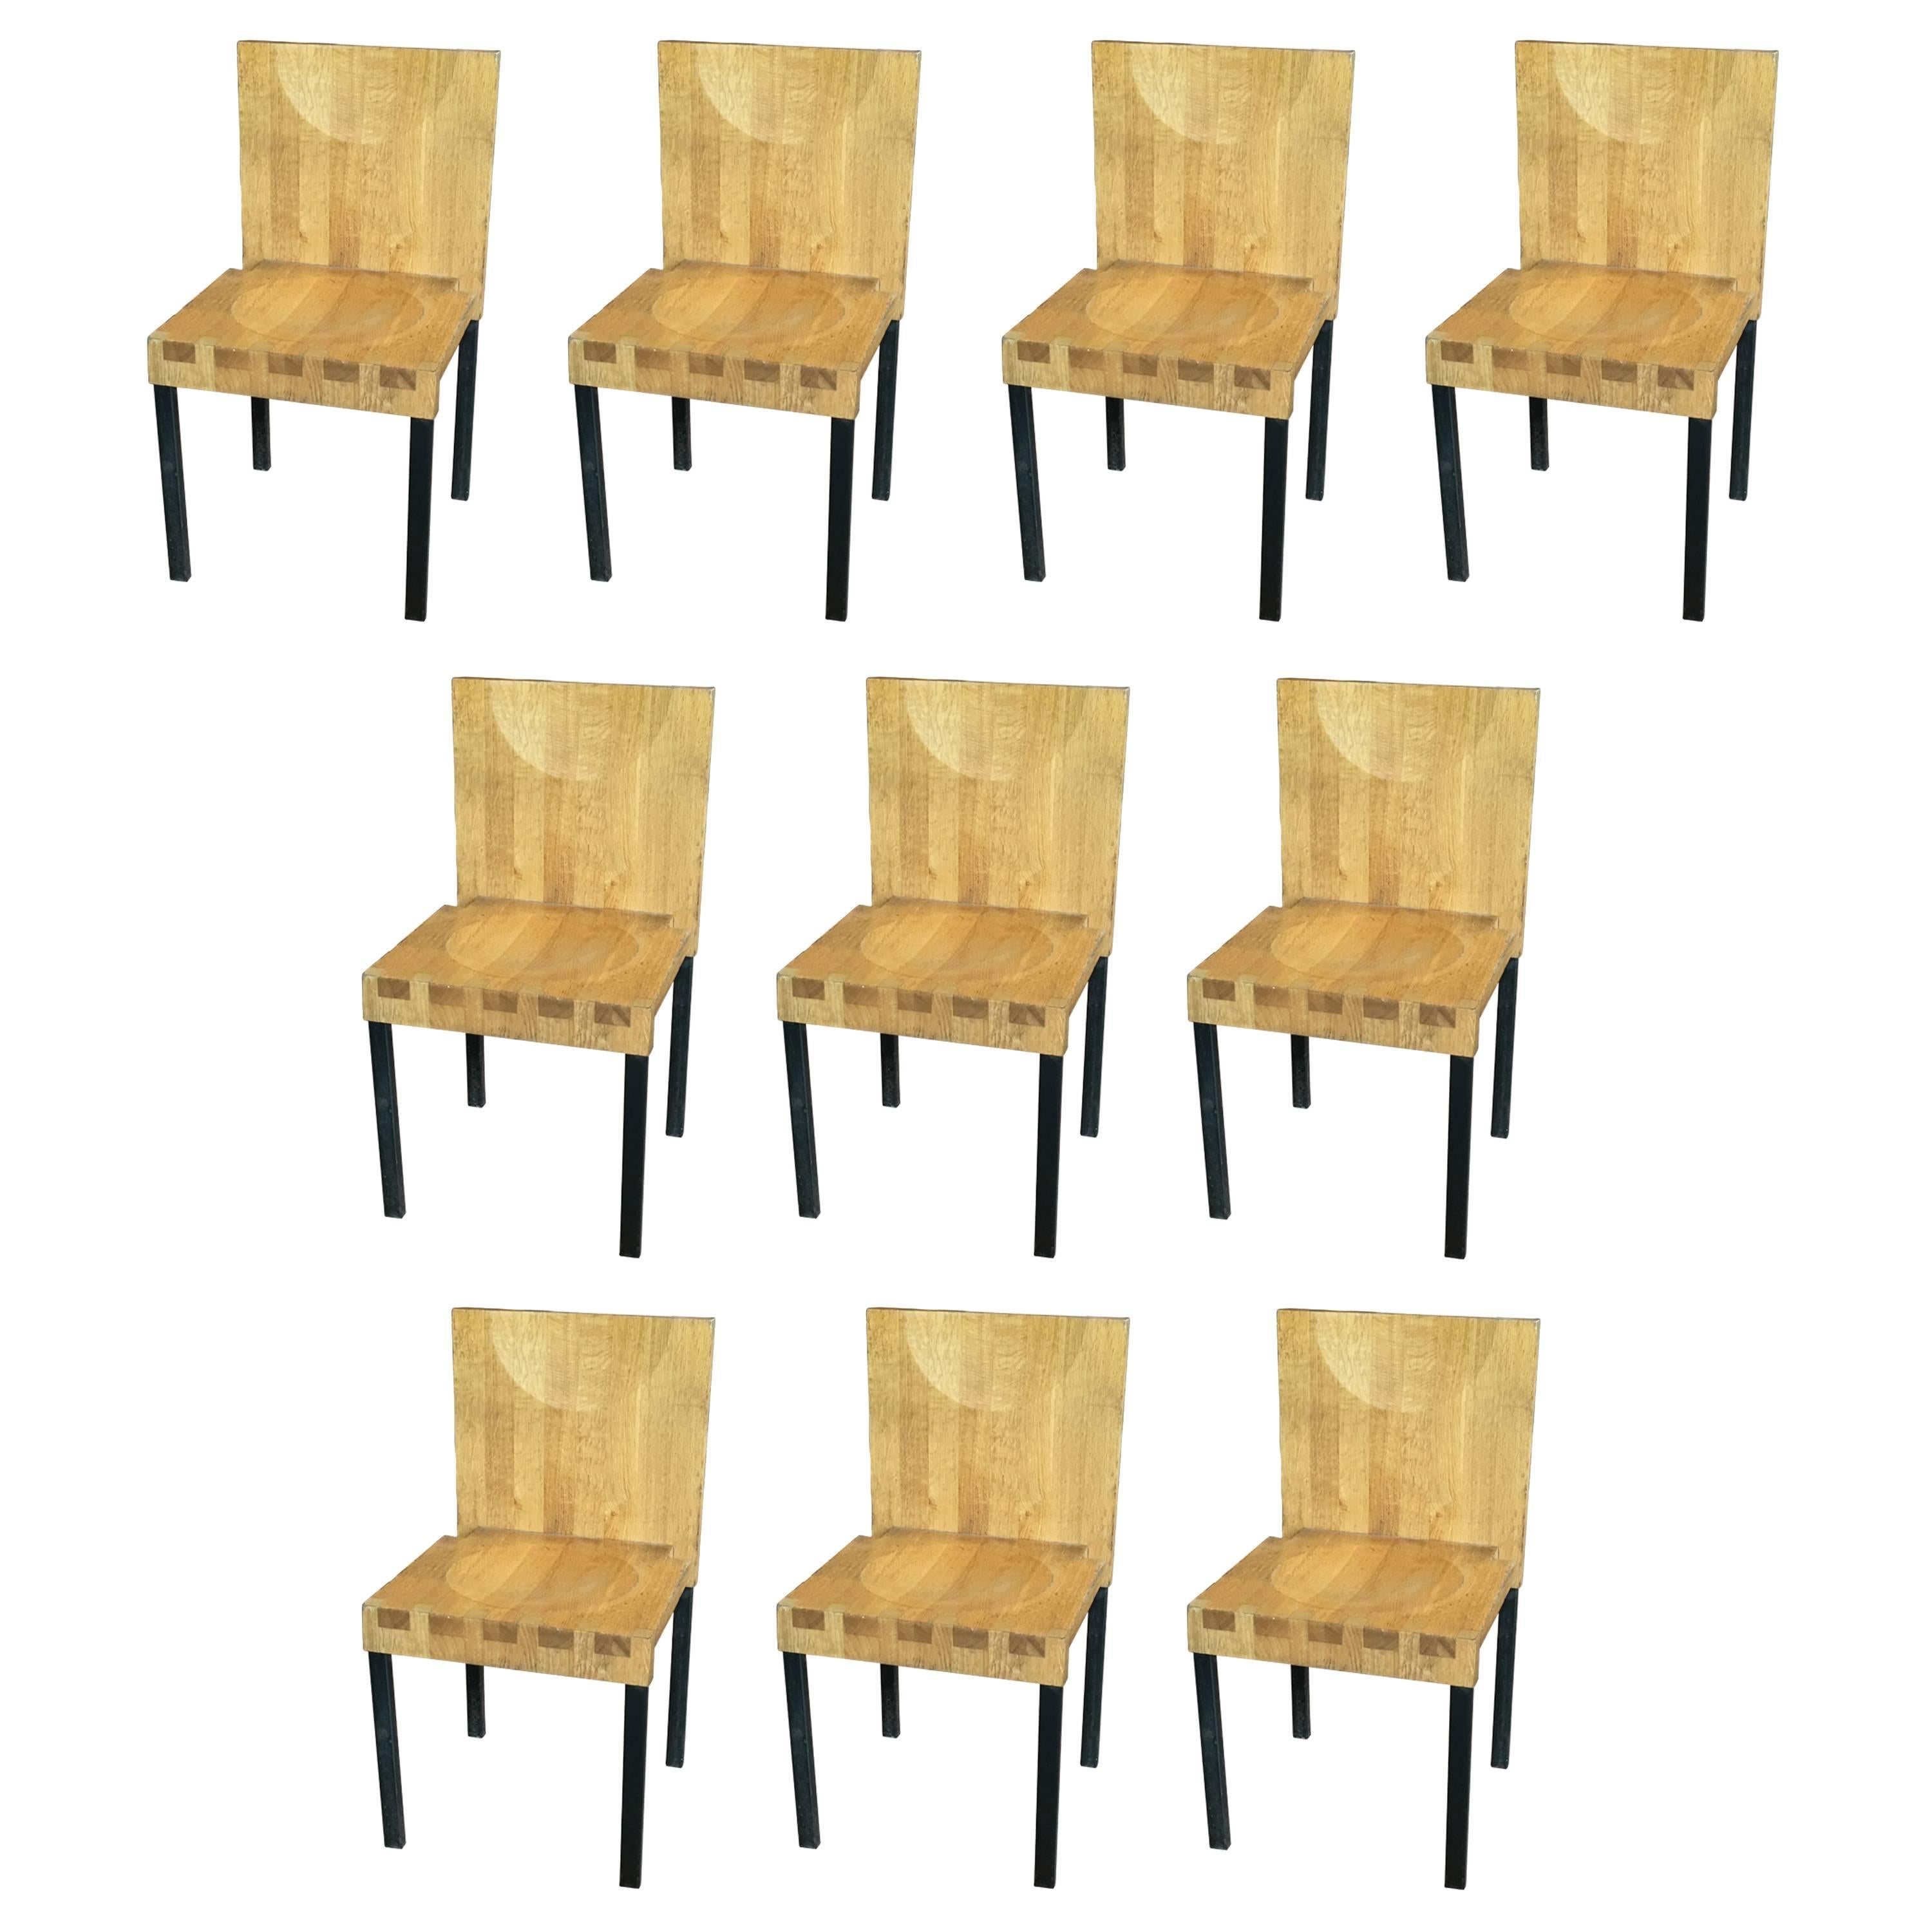 Set of 10 Scandinavian Modern Wood and Steel Dining Chairs